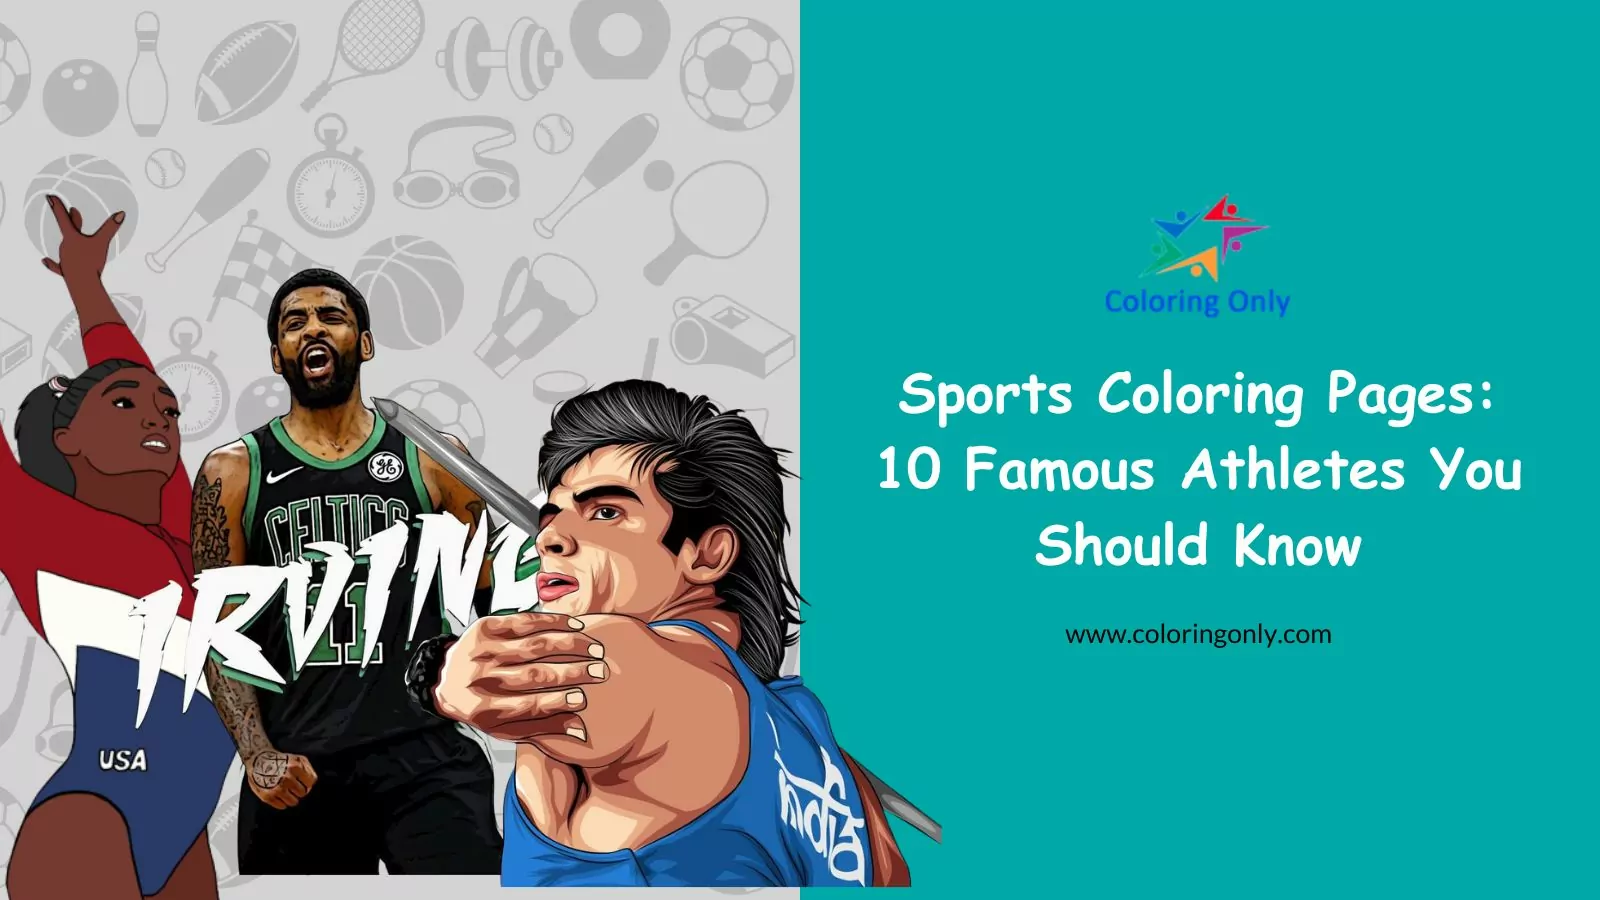 Sports Coloring Pages: 10 Famous Athletes You Should Know